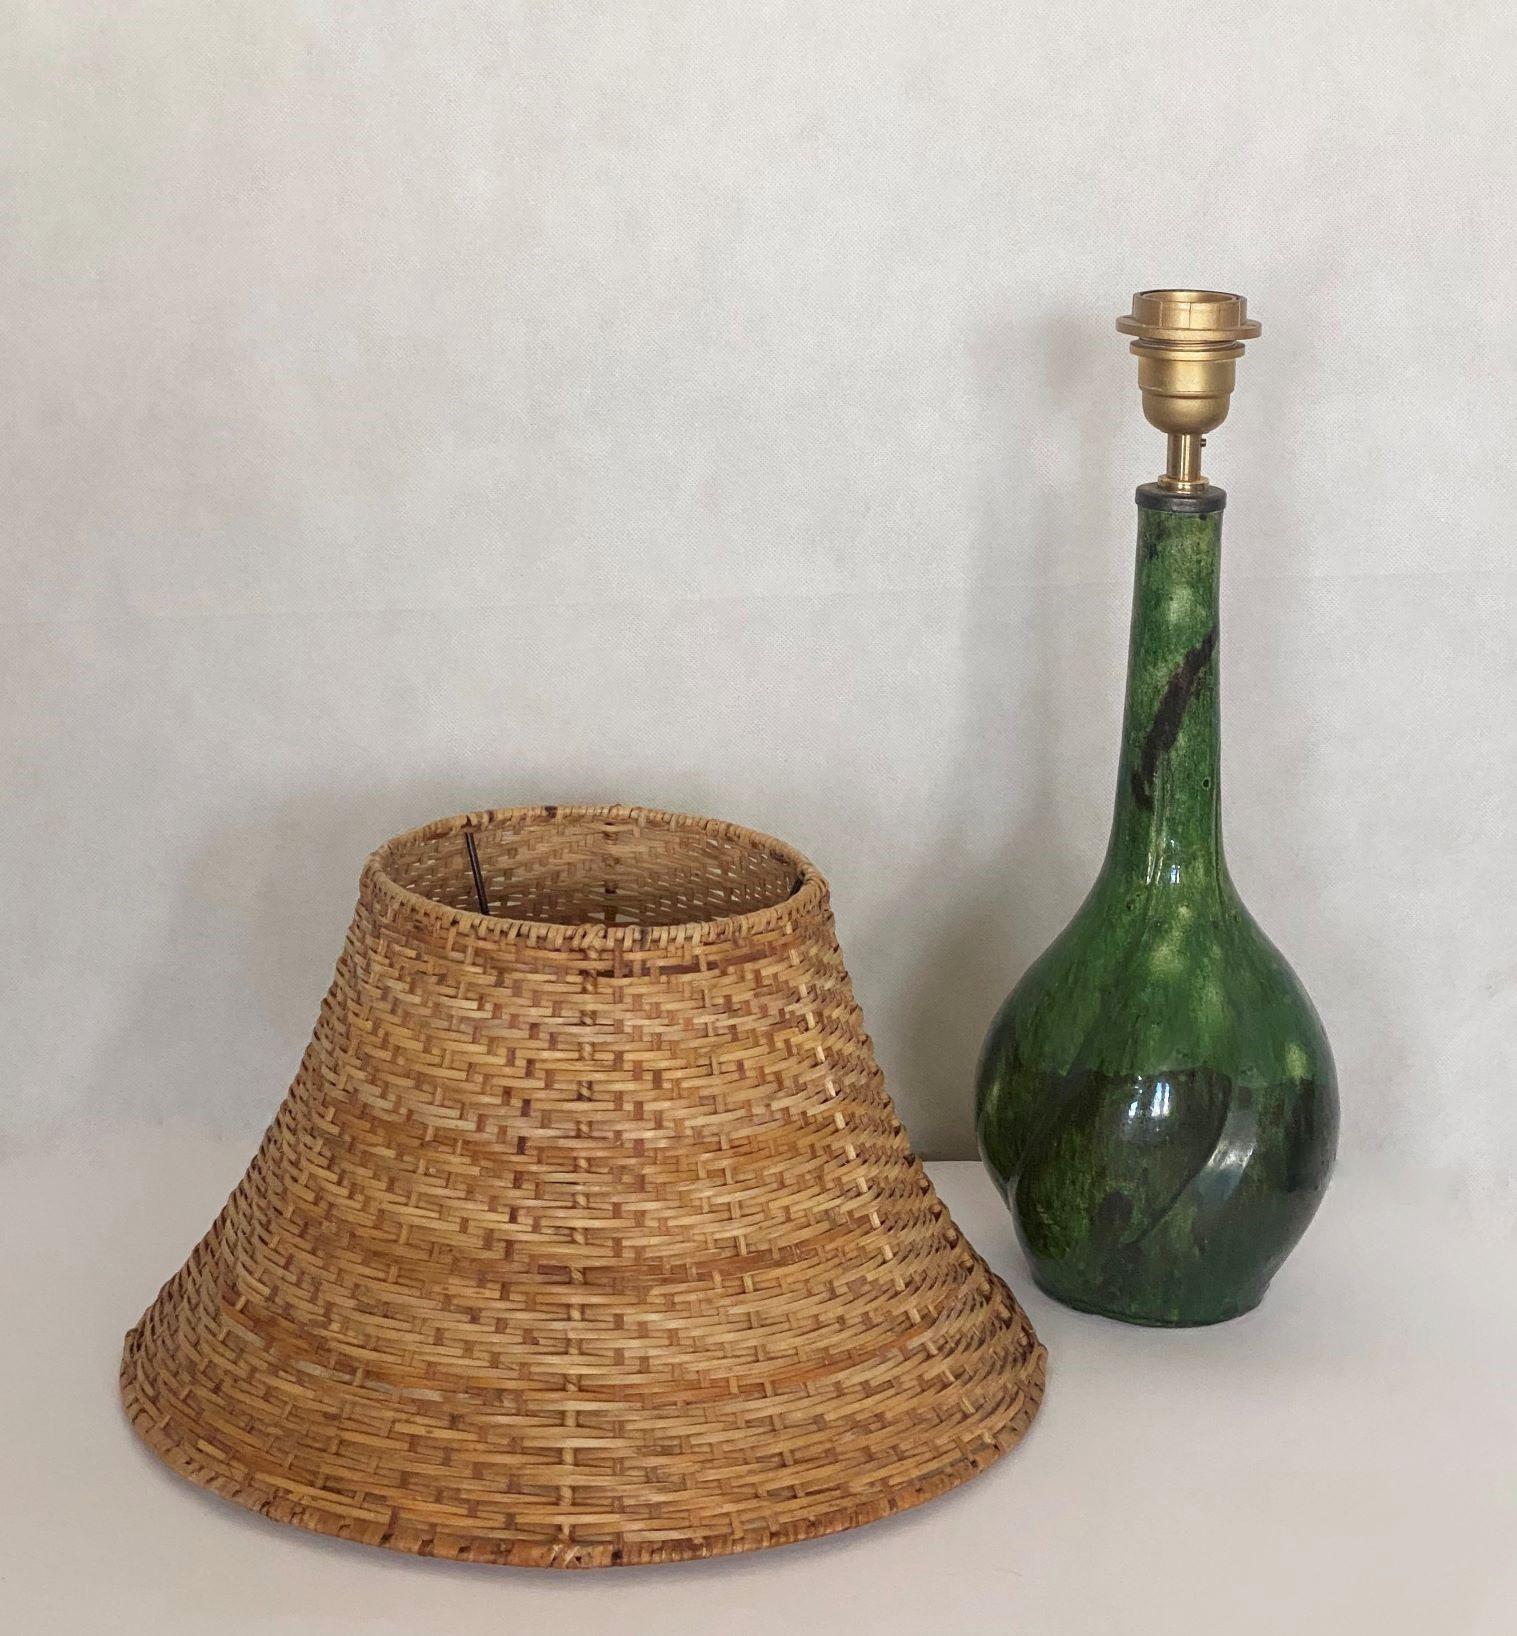 Danish Hand-Painted Glased Ceramic Table Lamp with Wicker Shade, 1960s For Sale 6